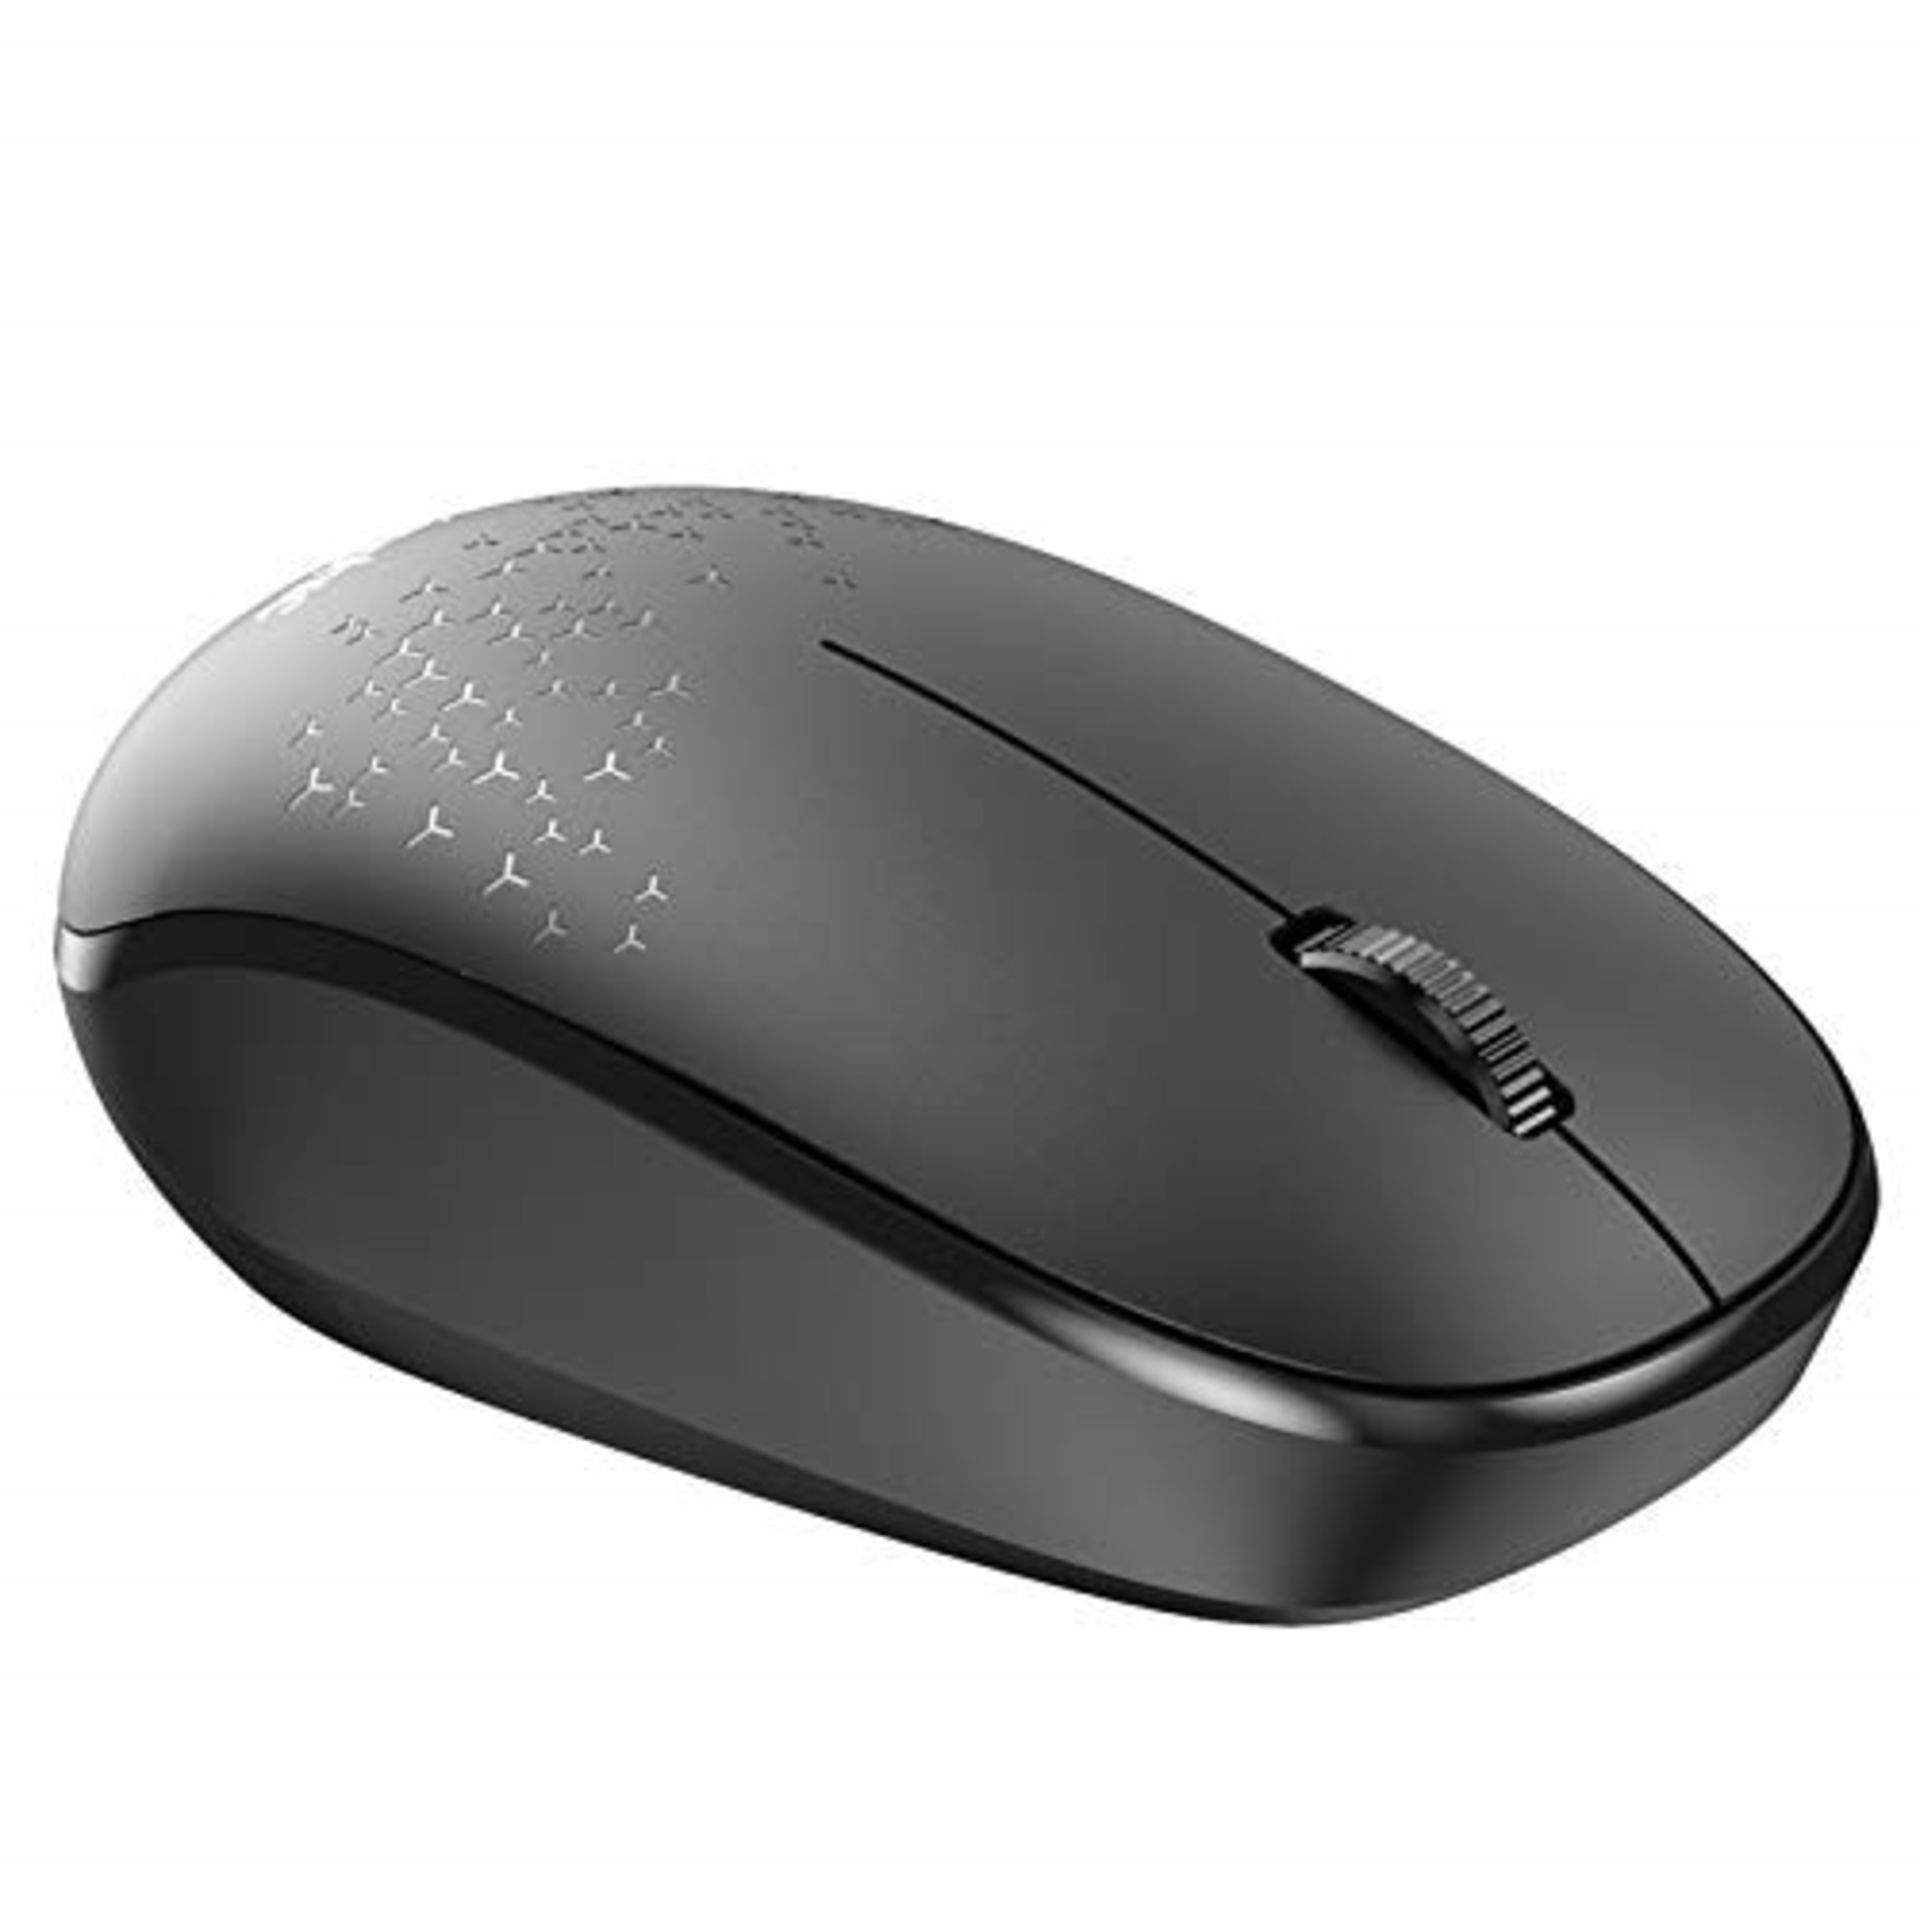 INPHIC Bluetooth Mouse, Mini Silent-Click Bluetooth 5.0/3.0 Wireless Mouse, Compatible